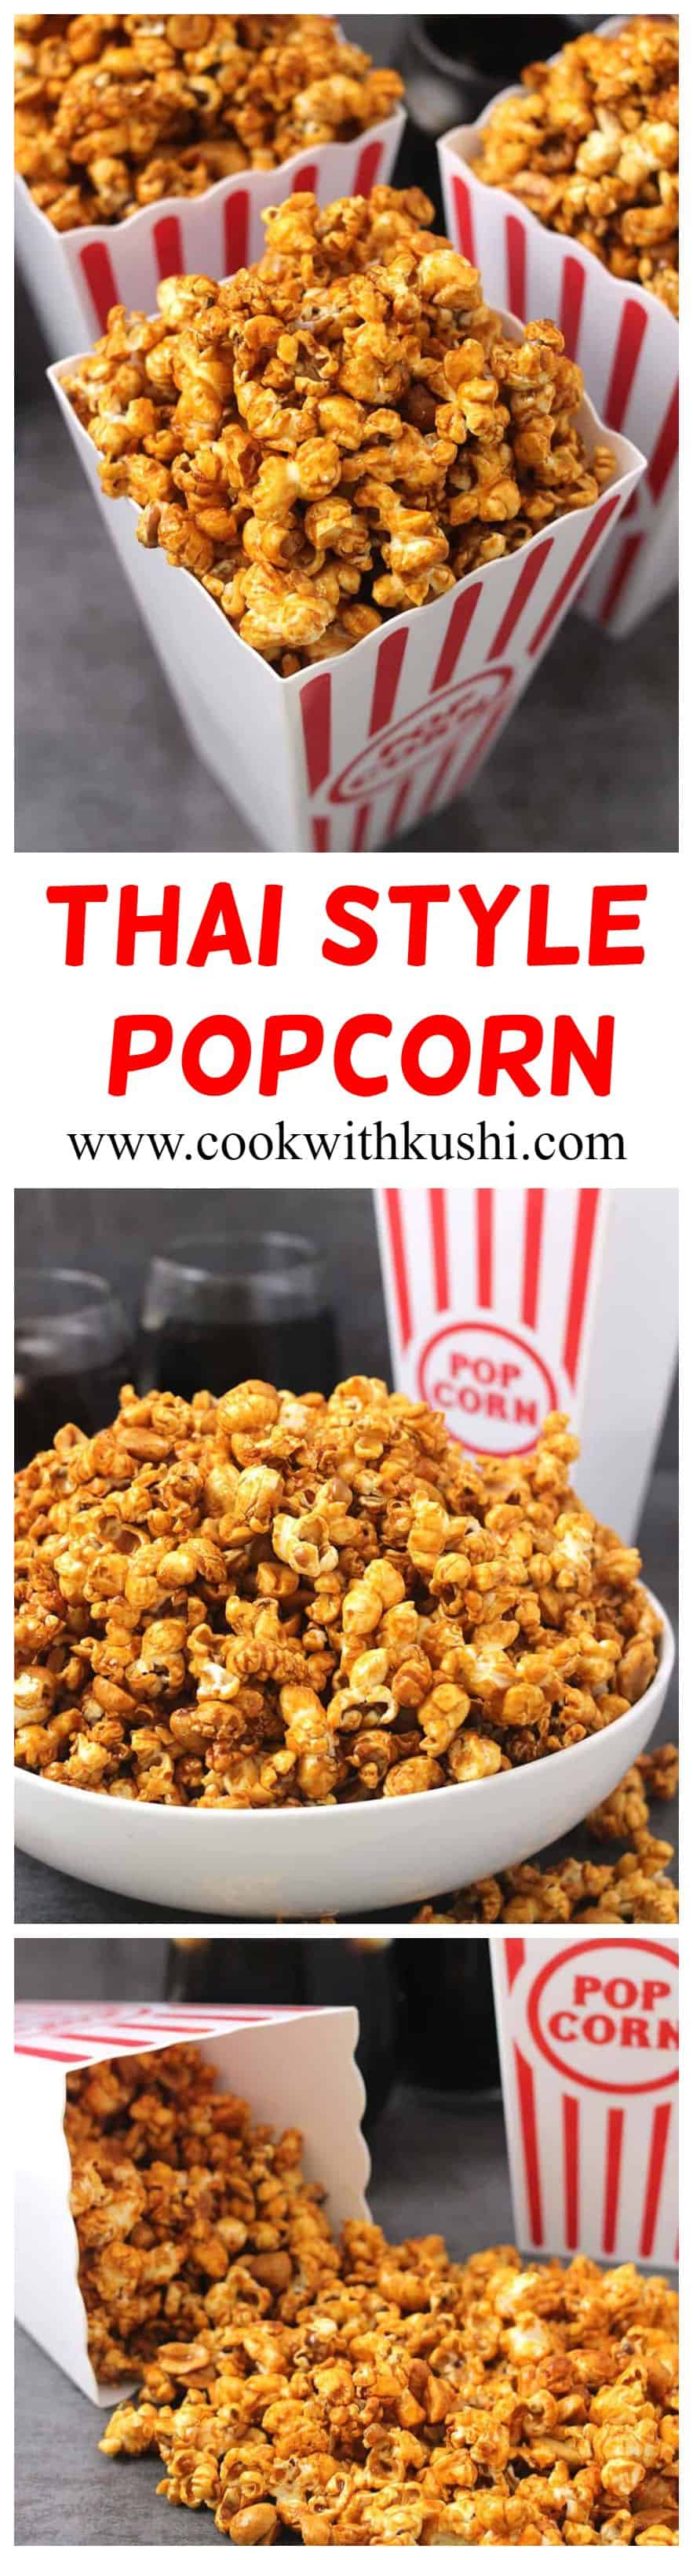 Thai Style Popcorn is an addictive snack with a perfect combination of flavors. It is crispy and crunchy with the right amount of sweet, sour, and spiciness. This is also vegan and gluten free. #popcorn #snacks #healthysnacks #indianrecipes #thairecipes #ketorecipes